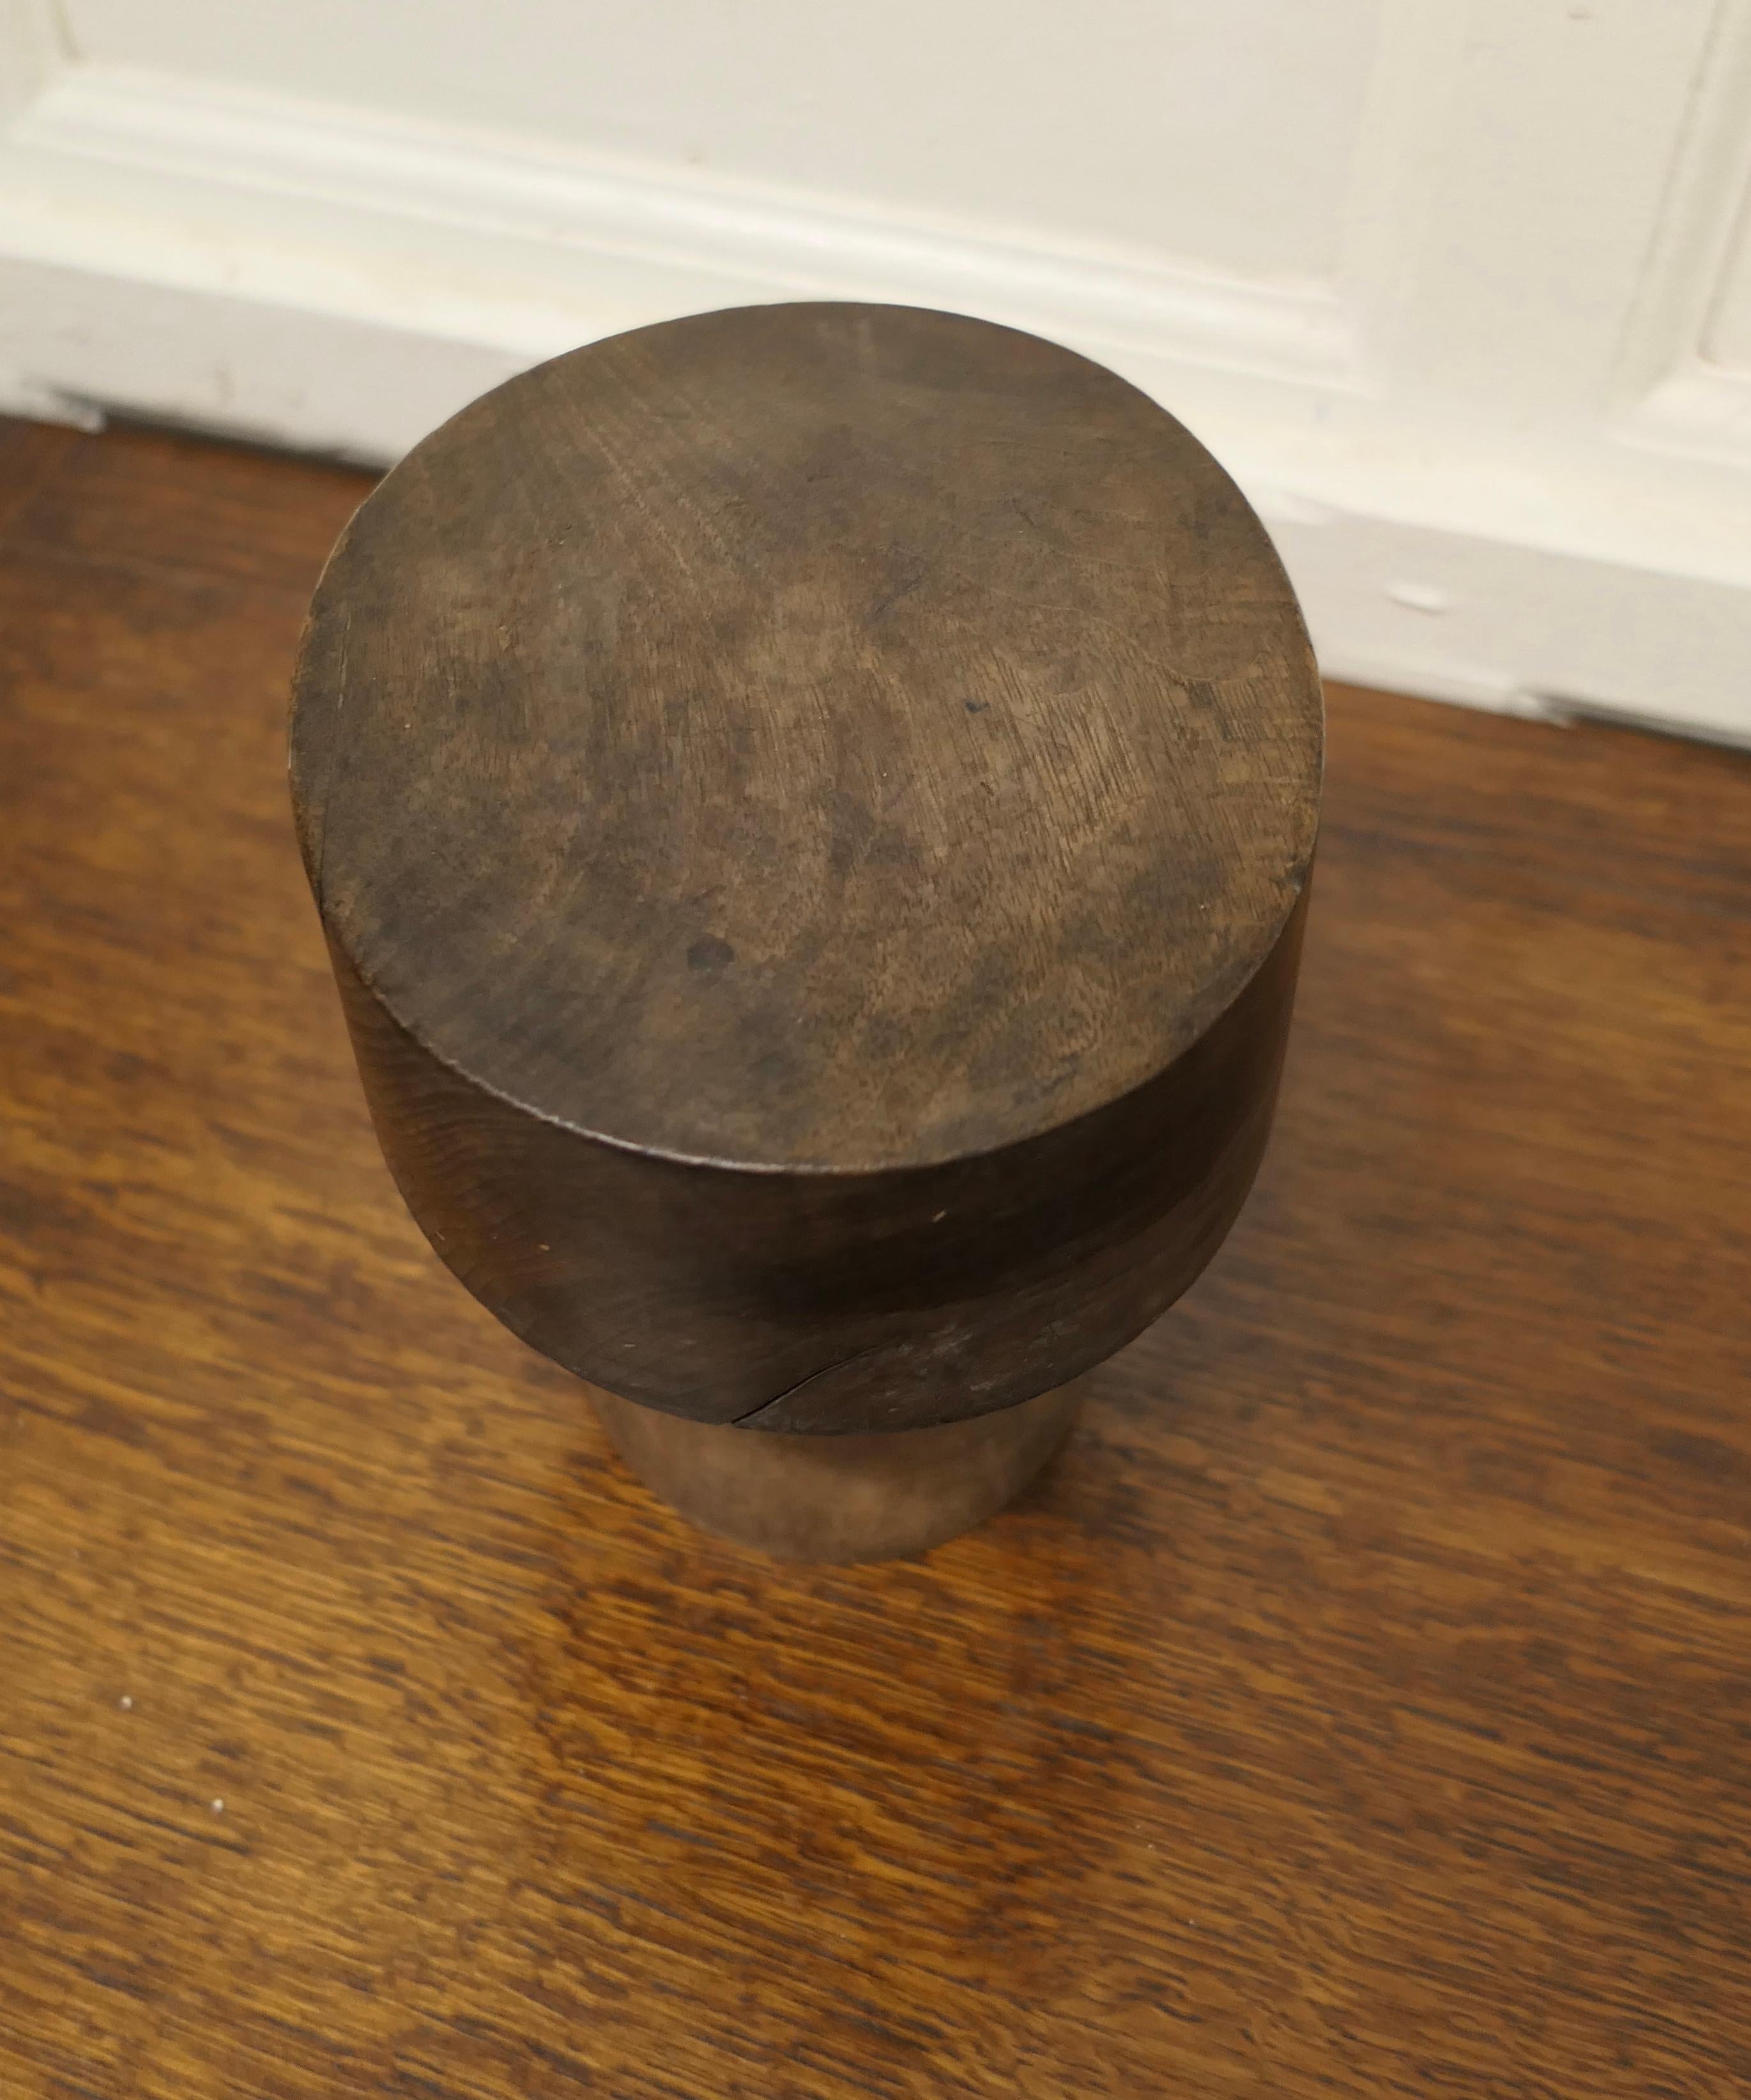 Vintage 19th century French hat block, shop display

This is one of a collection of milliners hat forms, they come from Lyon and date from before 1900

This block is made in fruitwood, the shape an oval pill box and it is on a stand 
The hat on